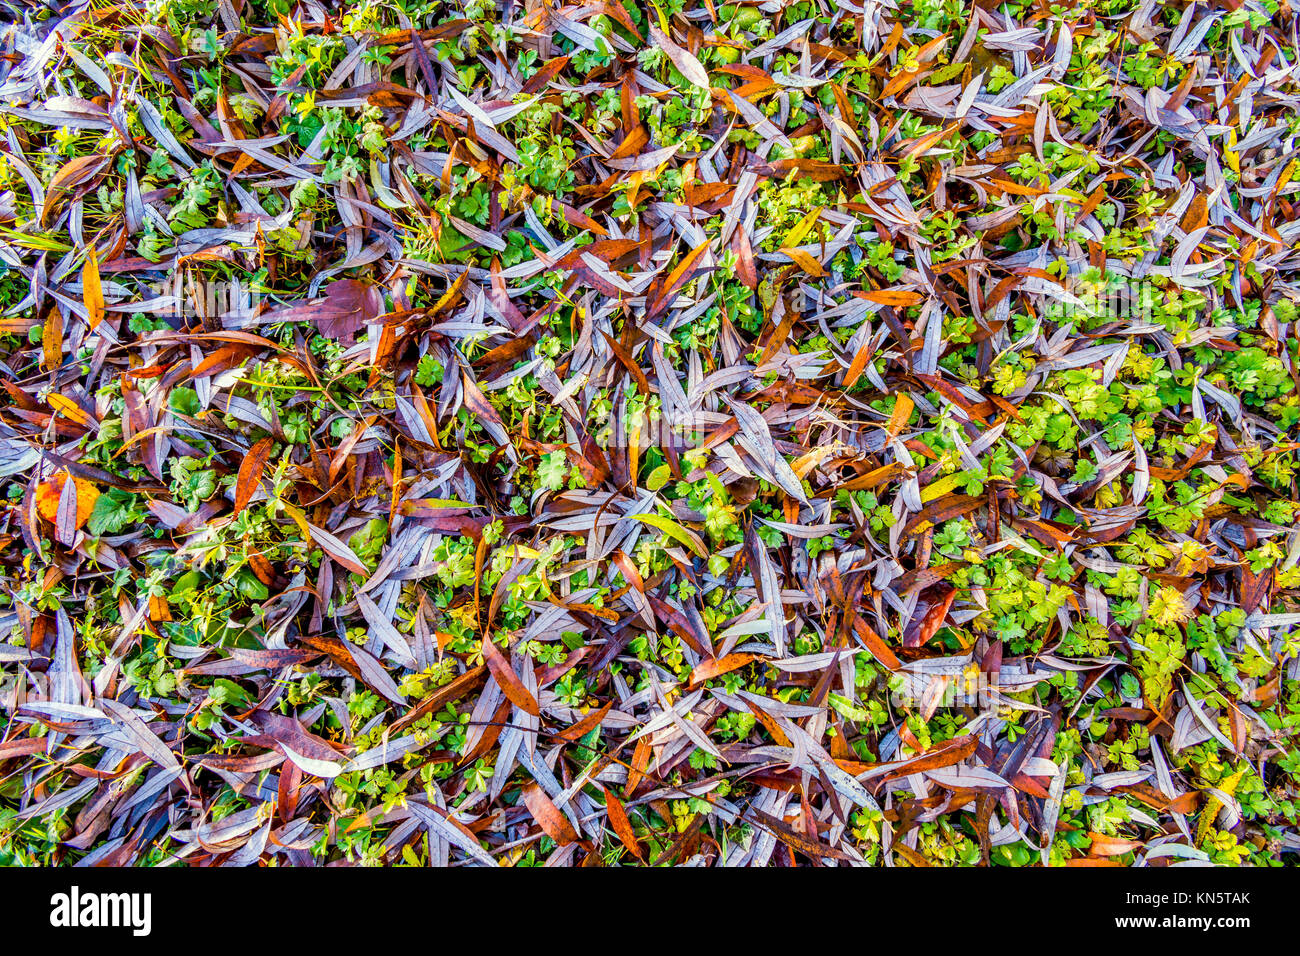 Willow tree leaves on ground. Stock Photo